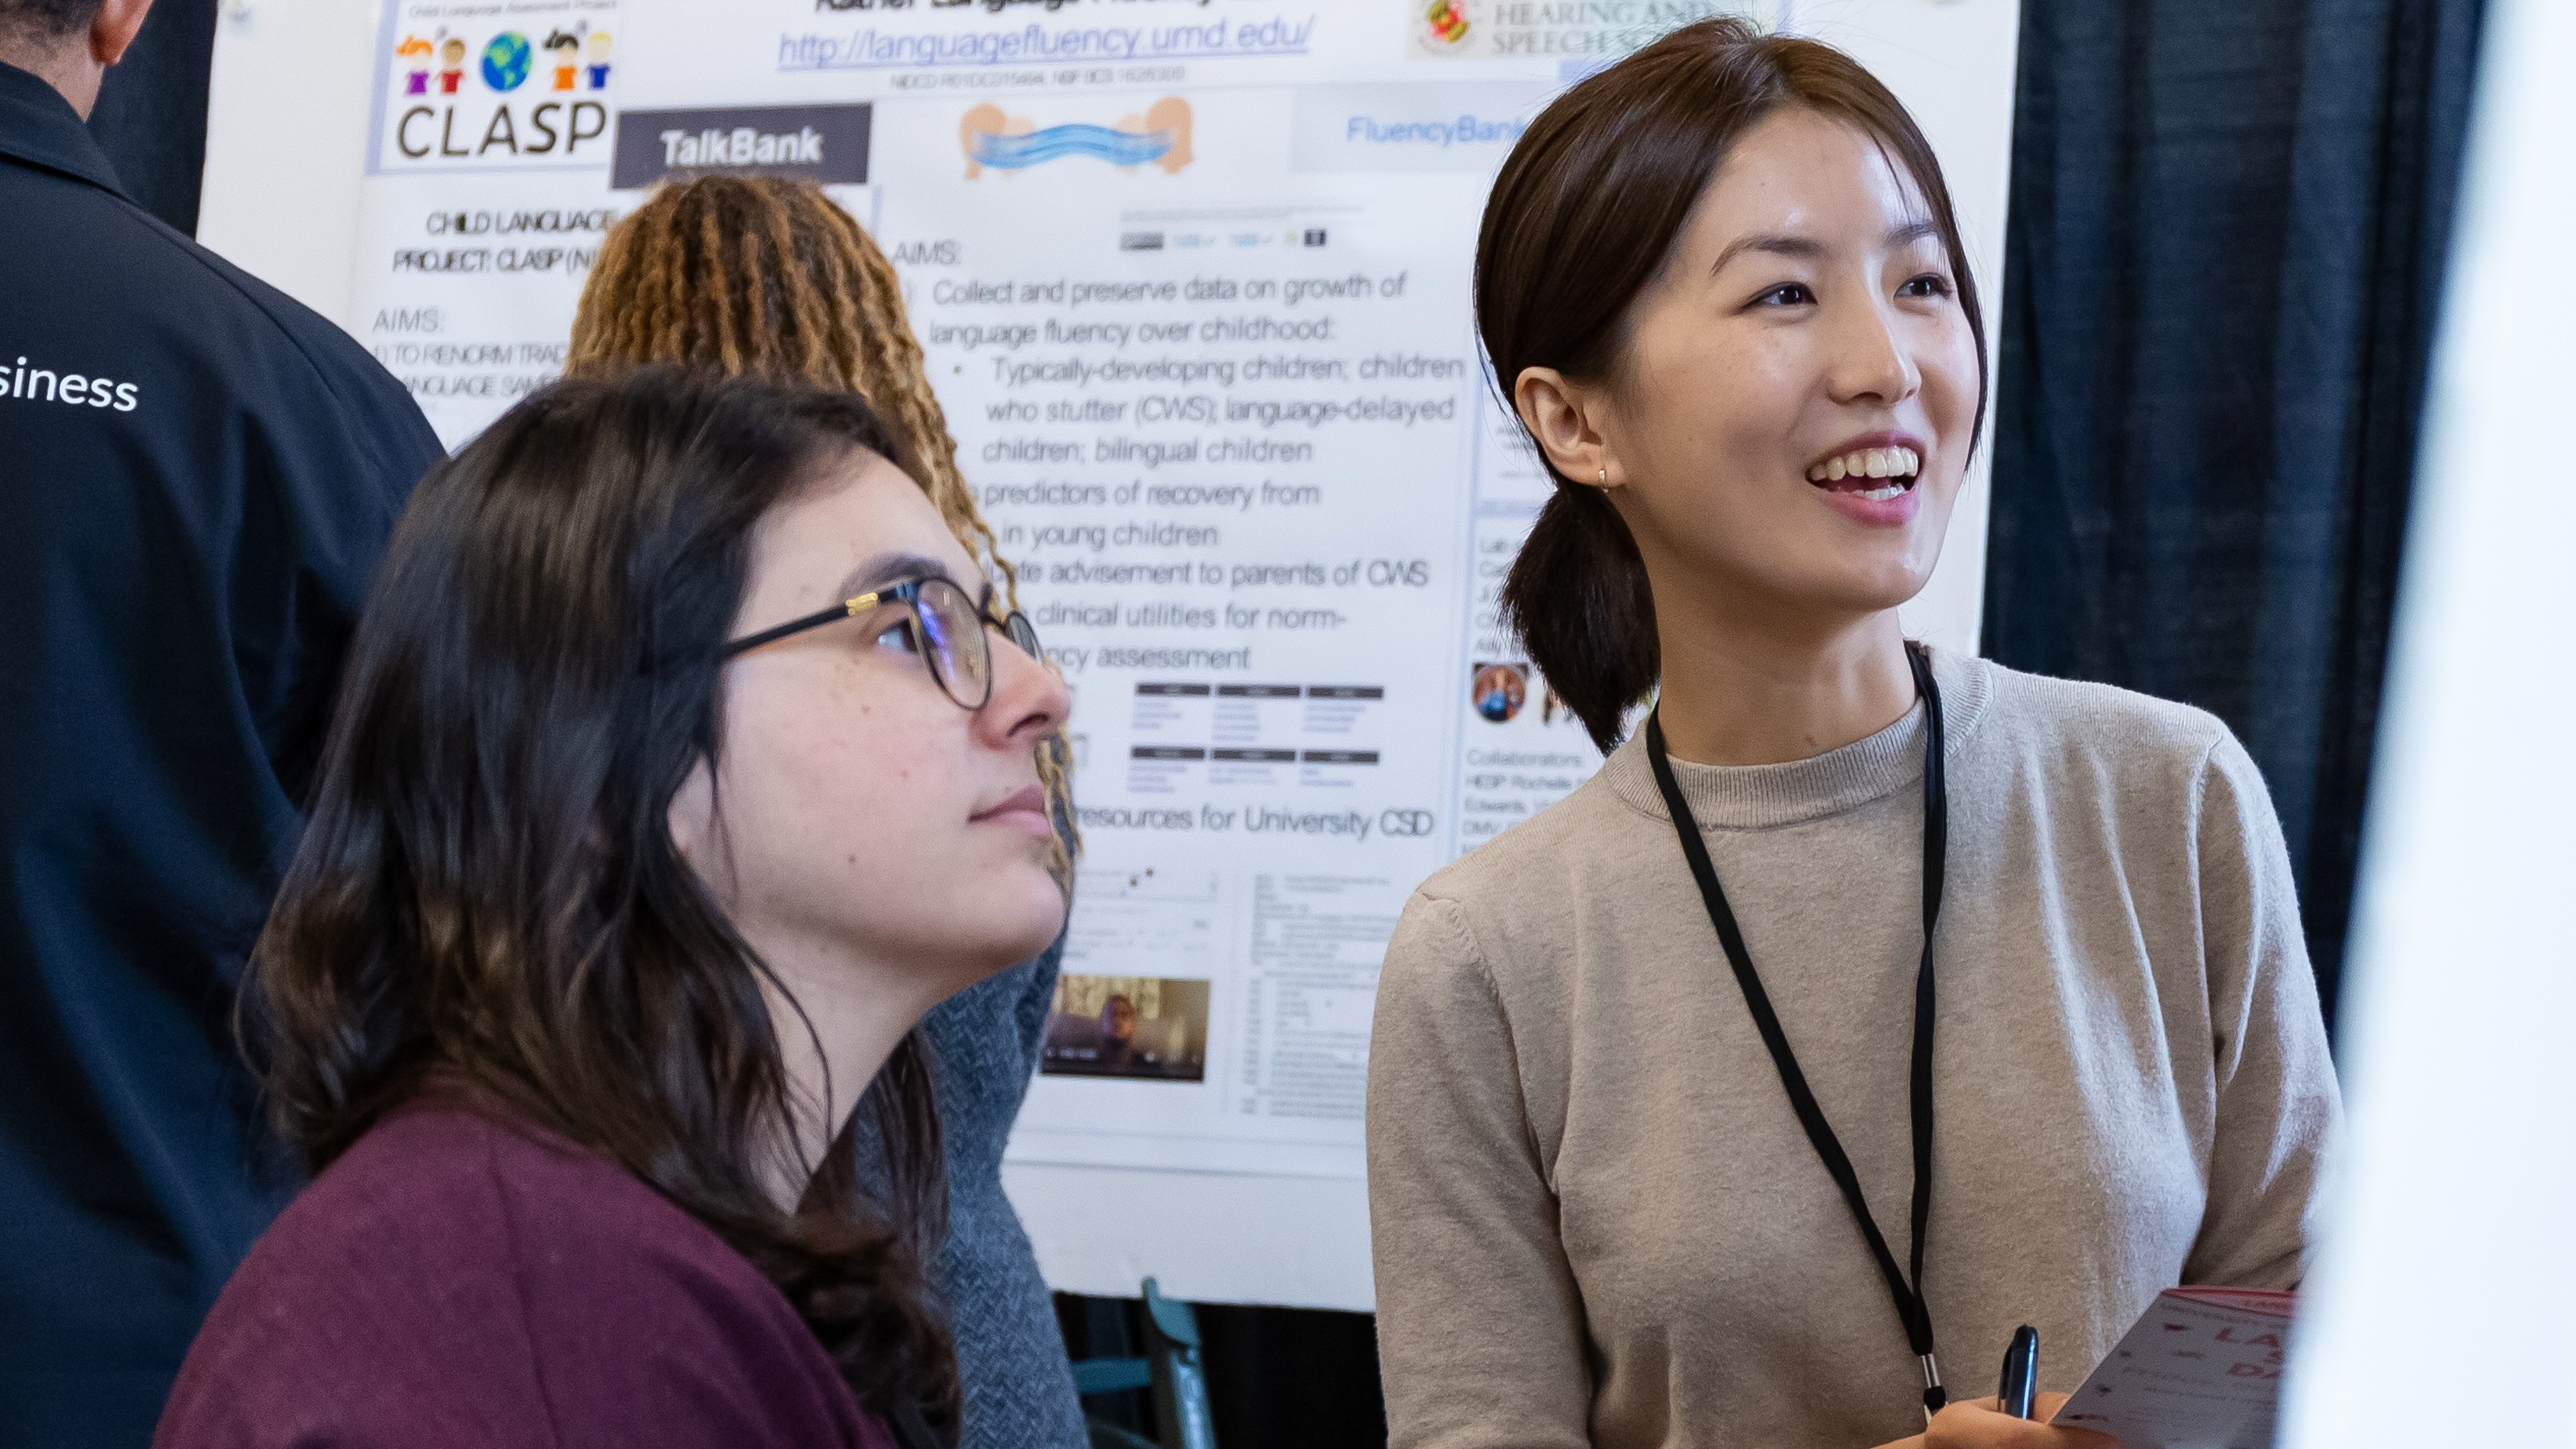 Two young women standing at a poster presentation of research.